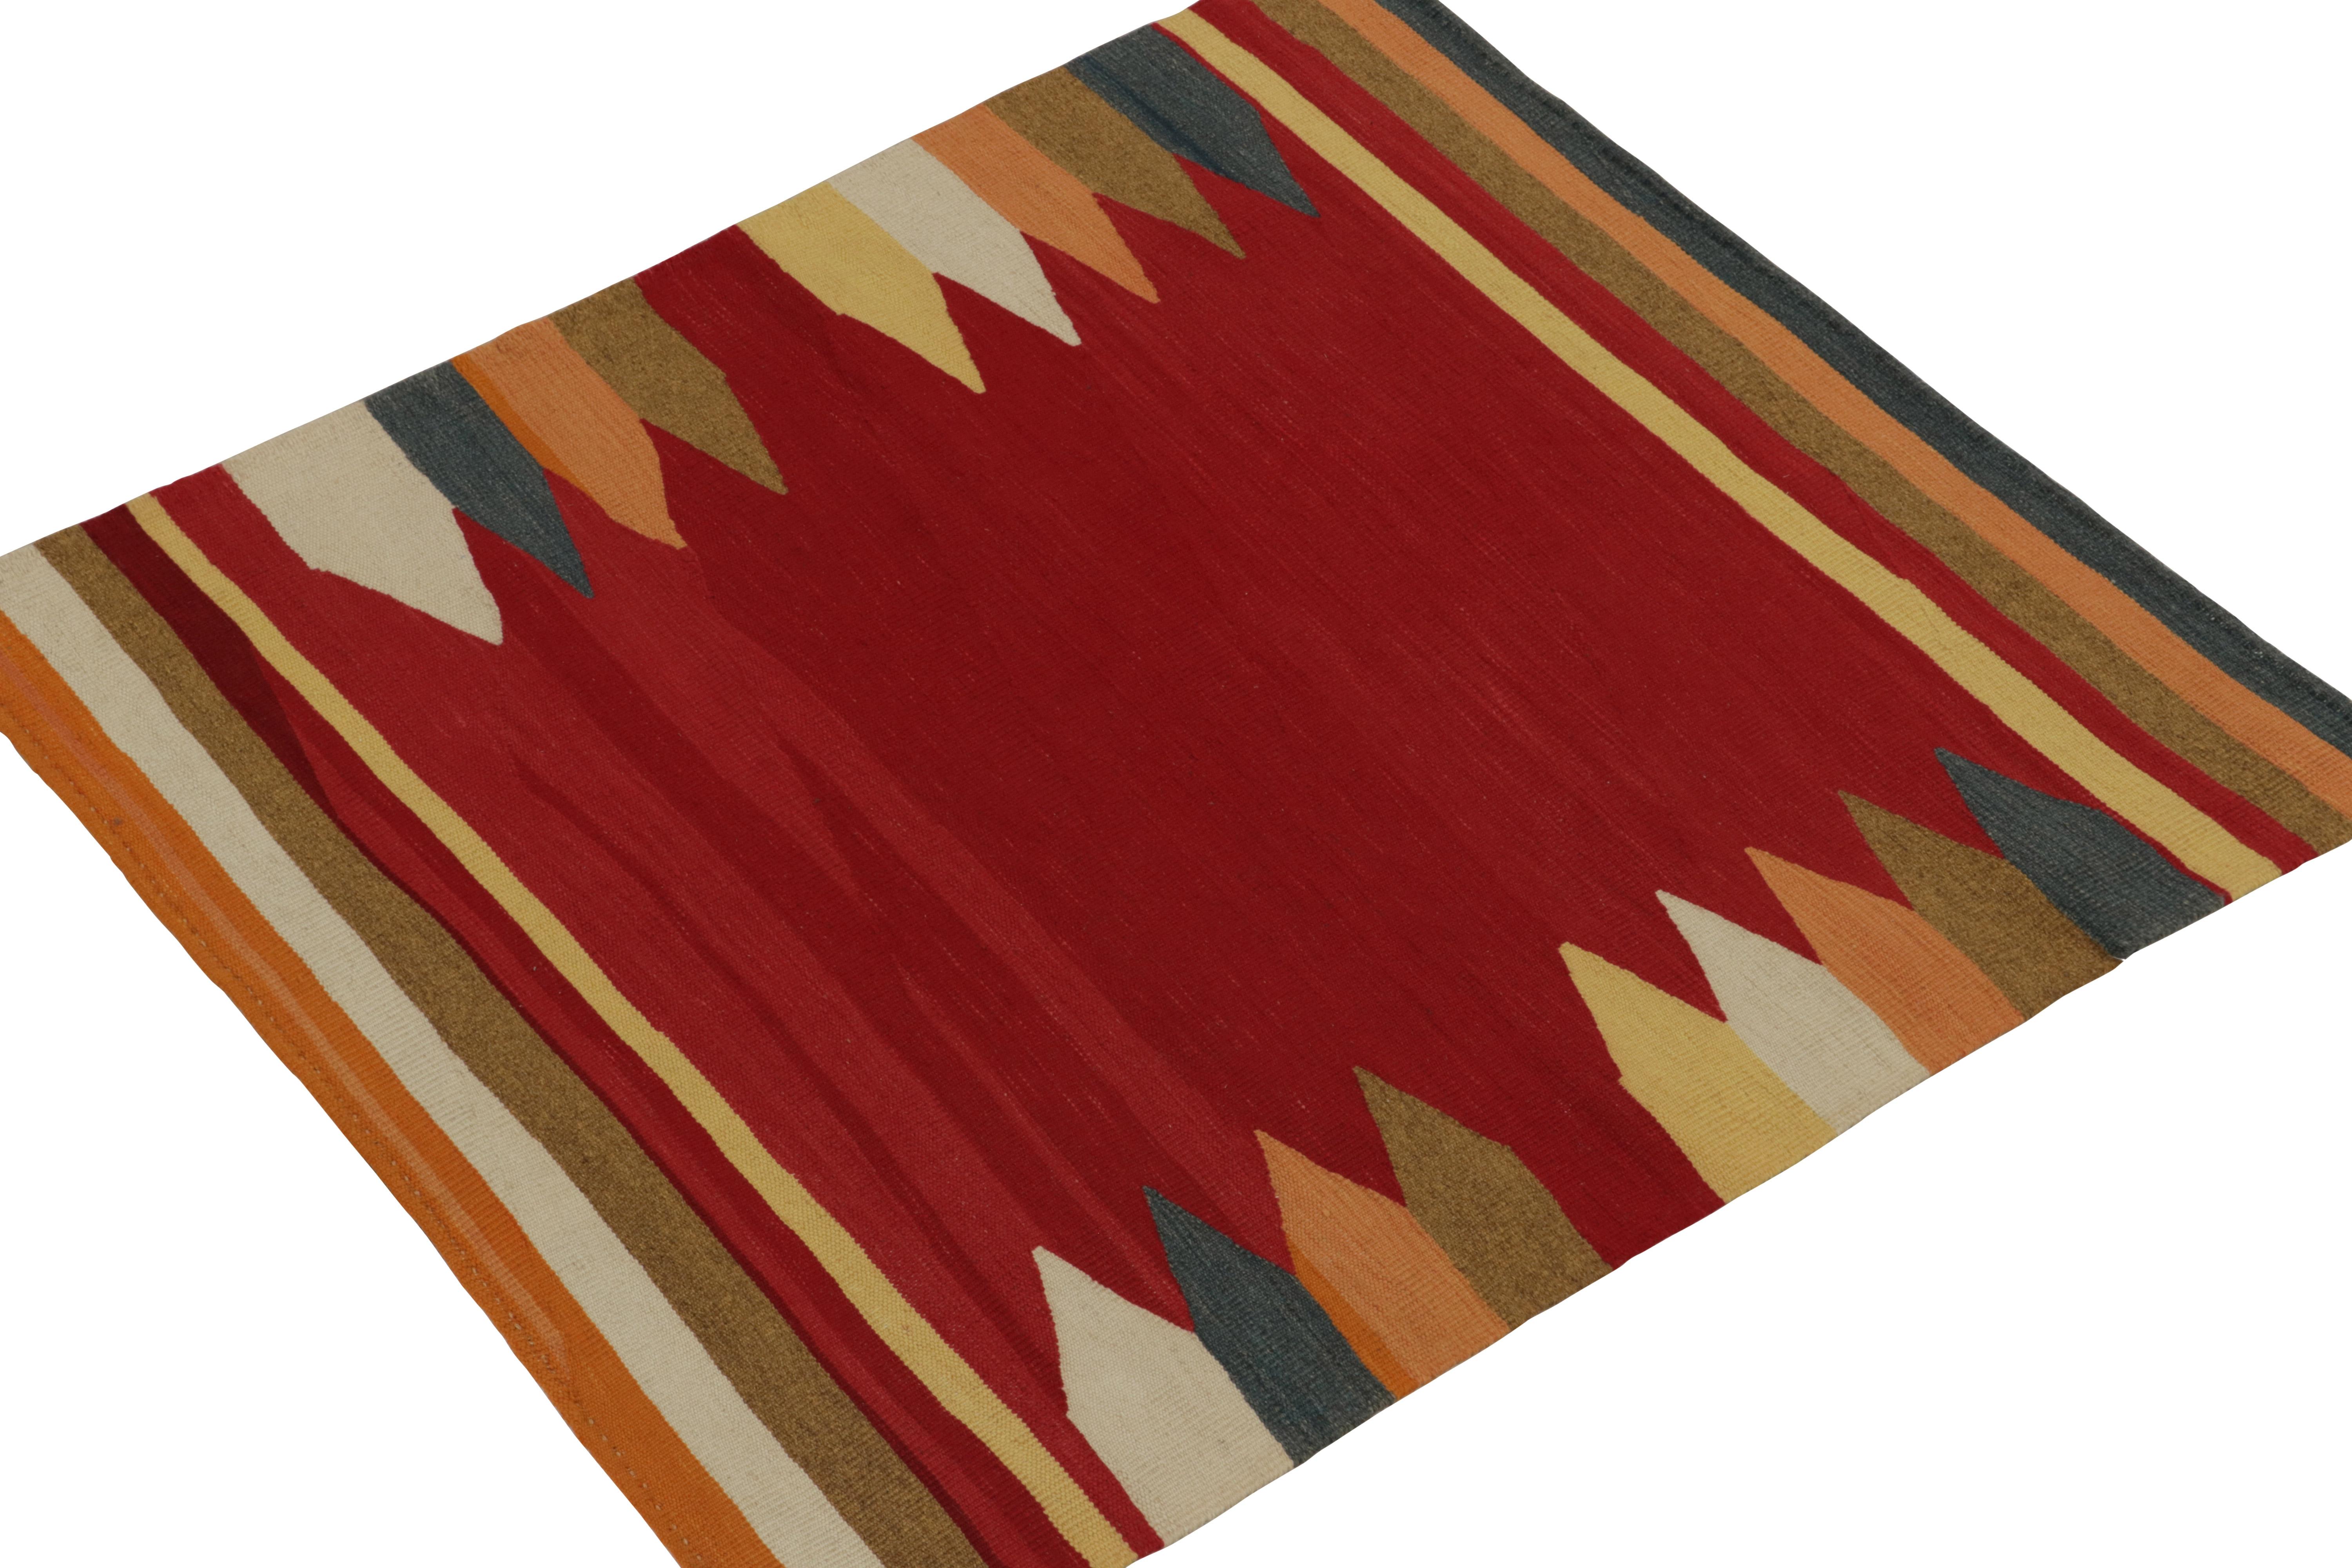 Tribal 1980s Vintage Sofreh Kilim Rug in Red & Colorful Geometric Border by Rug & Kilim For Sale